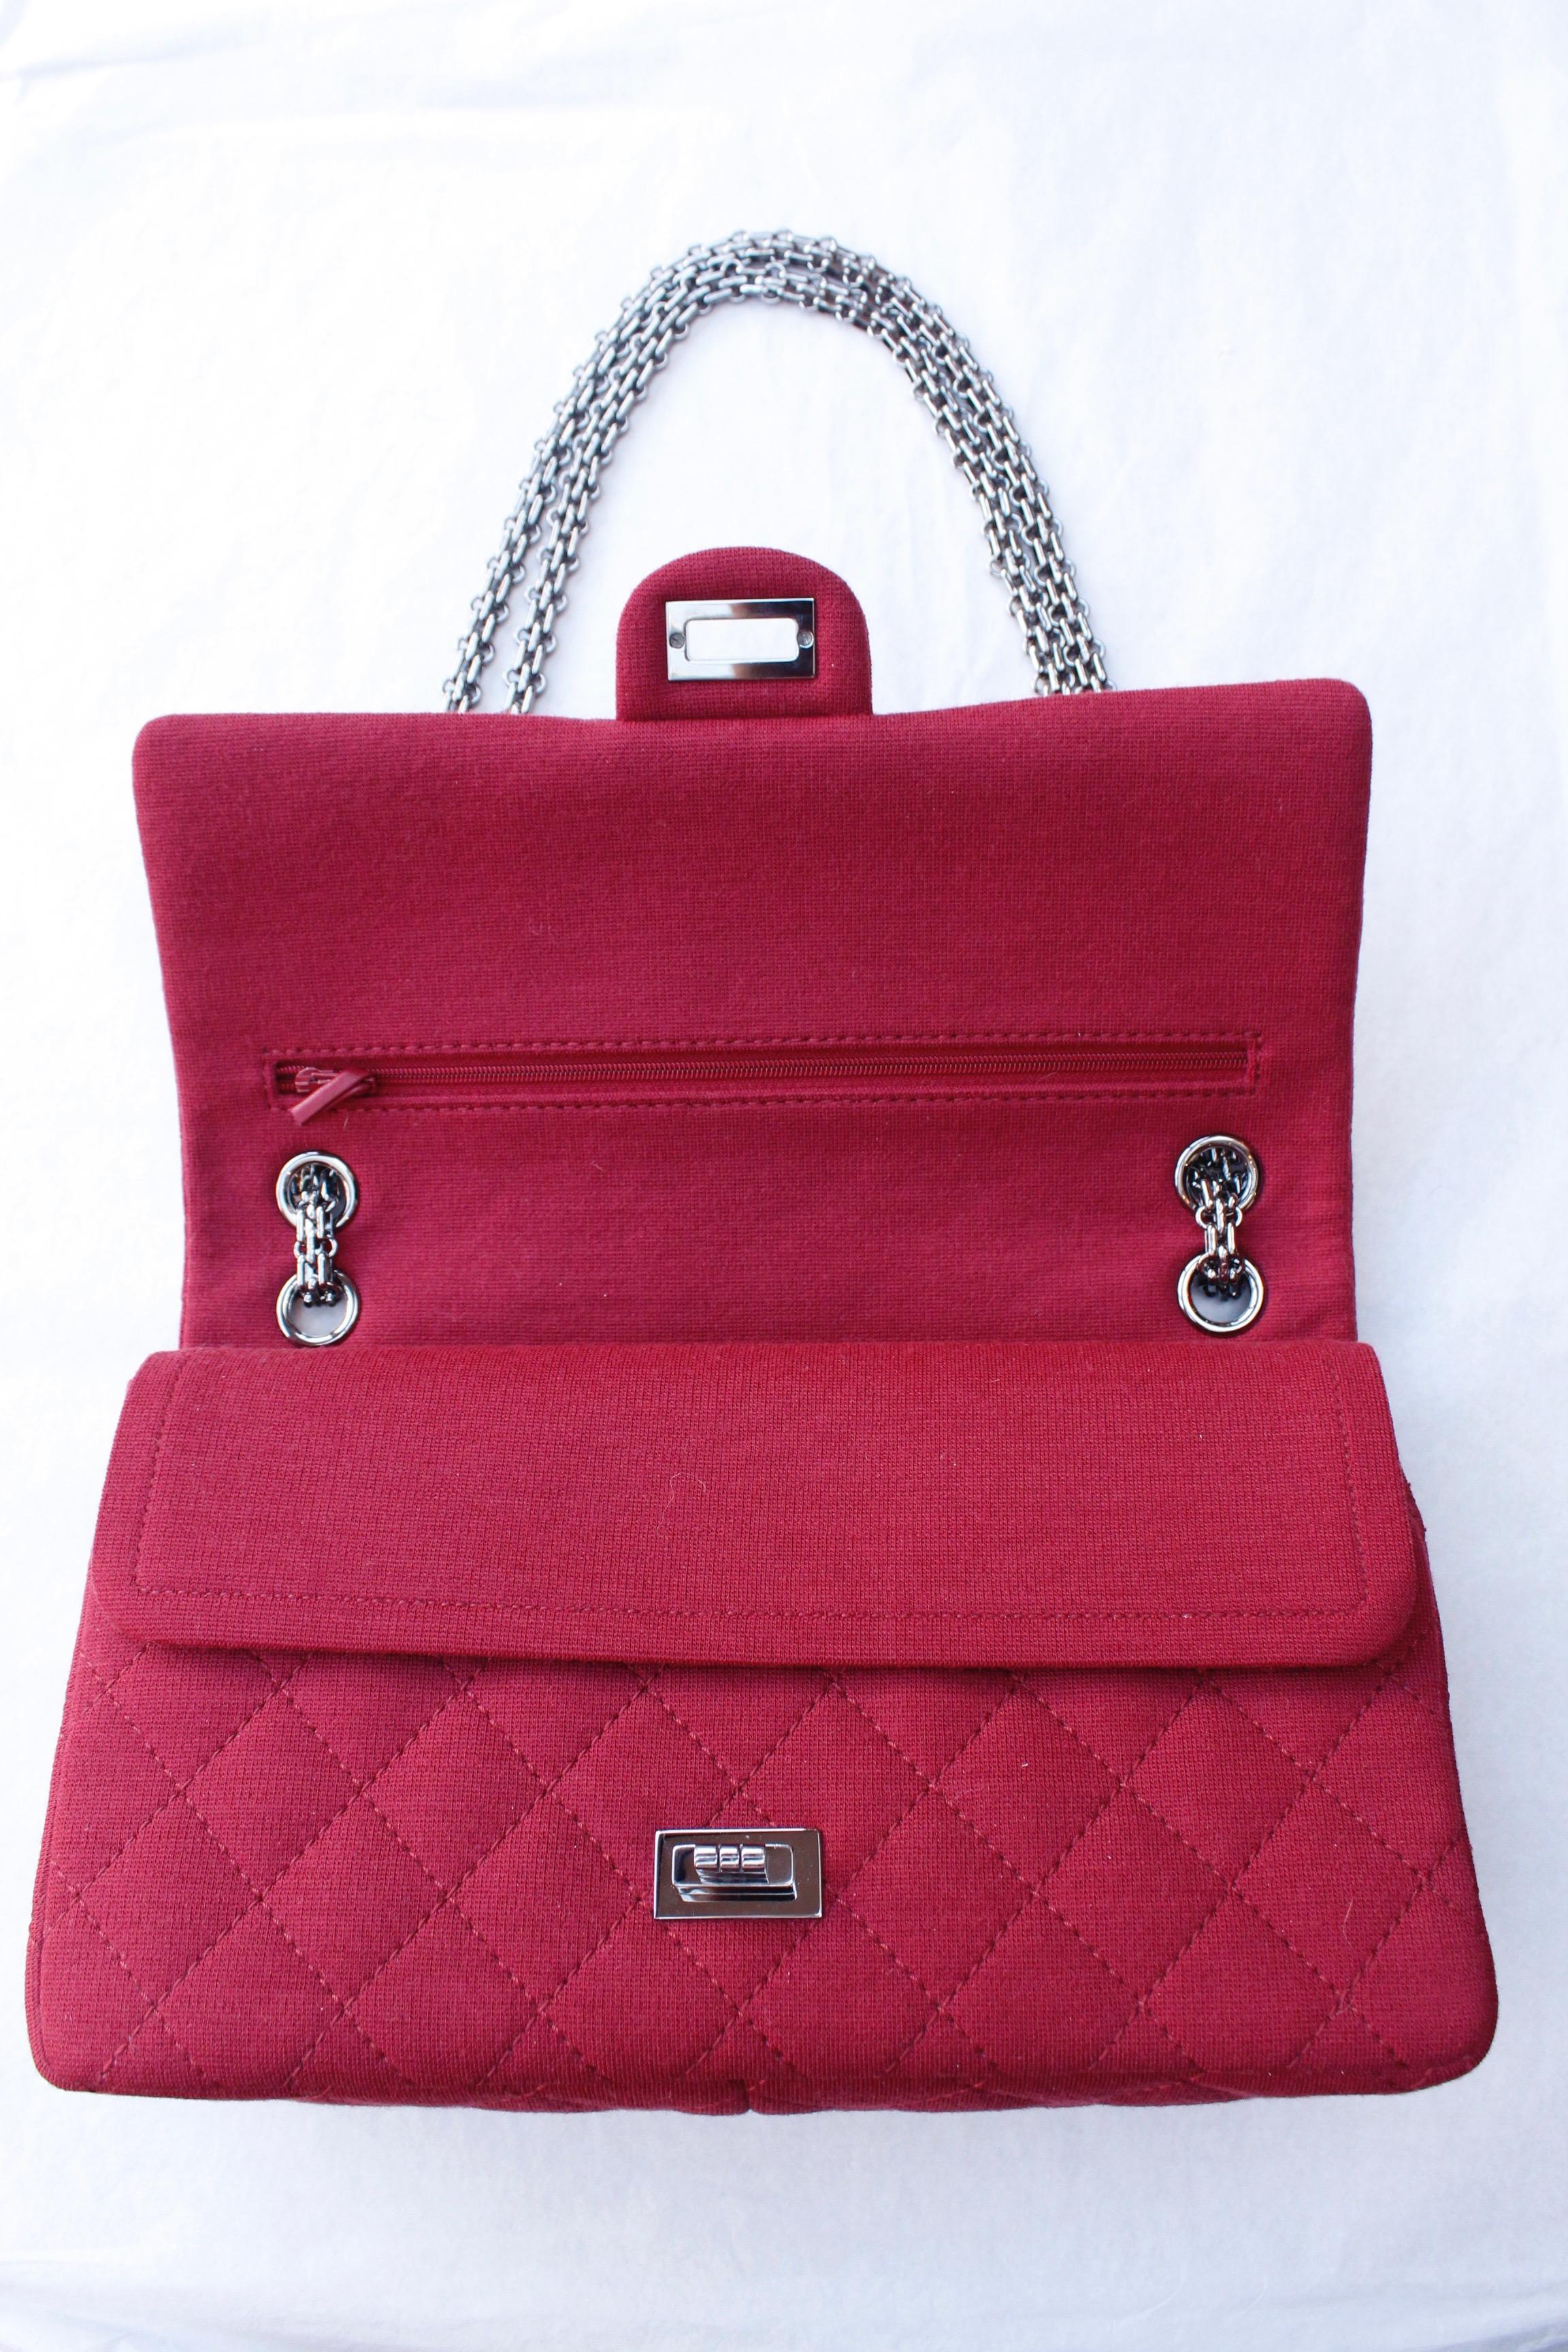 Chanel quilted red jersey 2.55 bag with silver plated chain handle For Sale 3